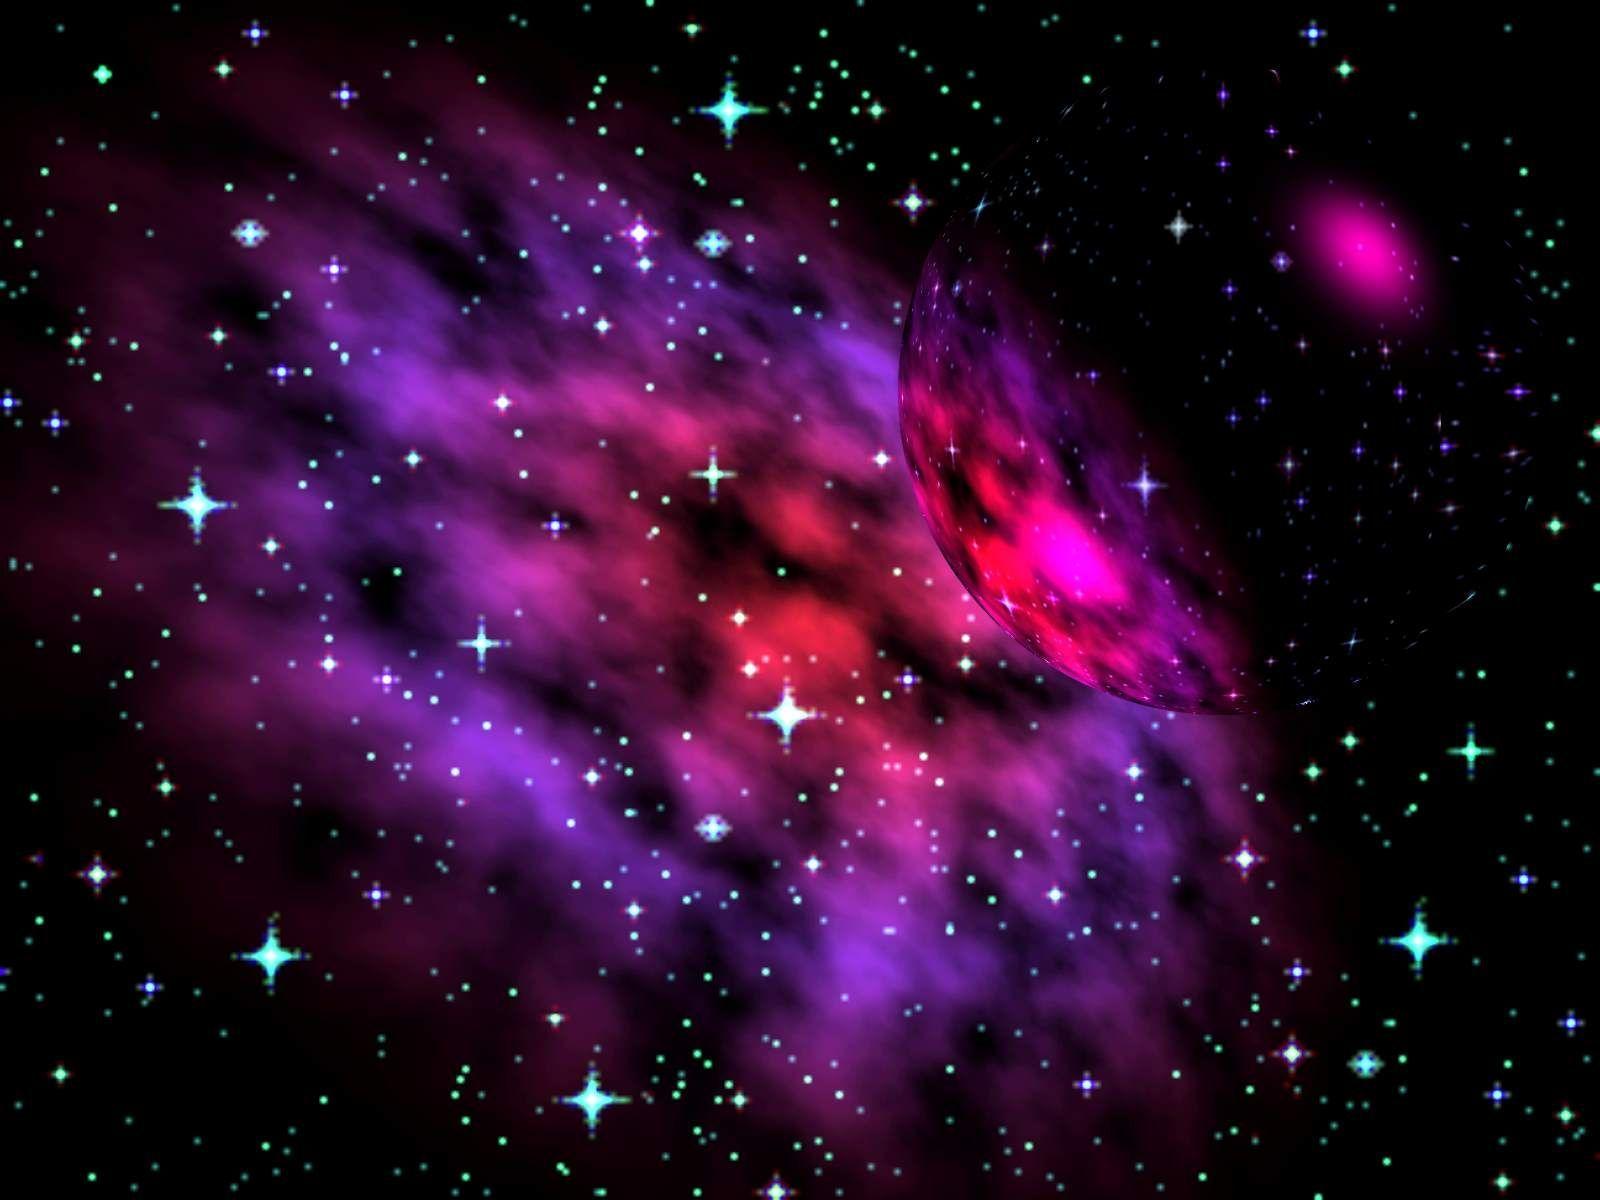 free picture quotes about astronomy. Galaxy Purple Background Image